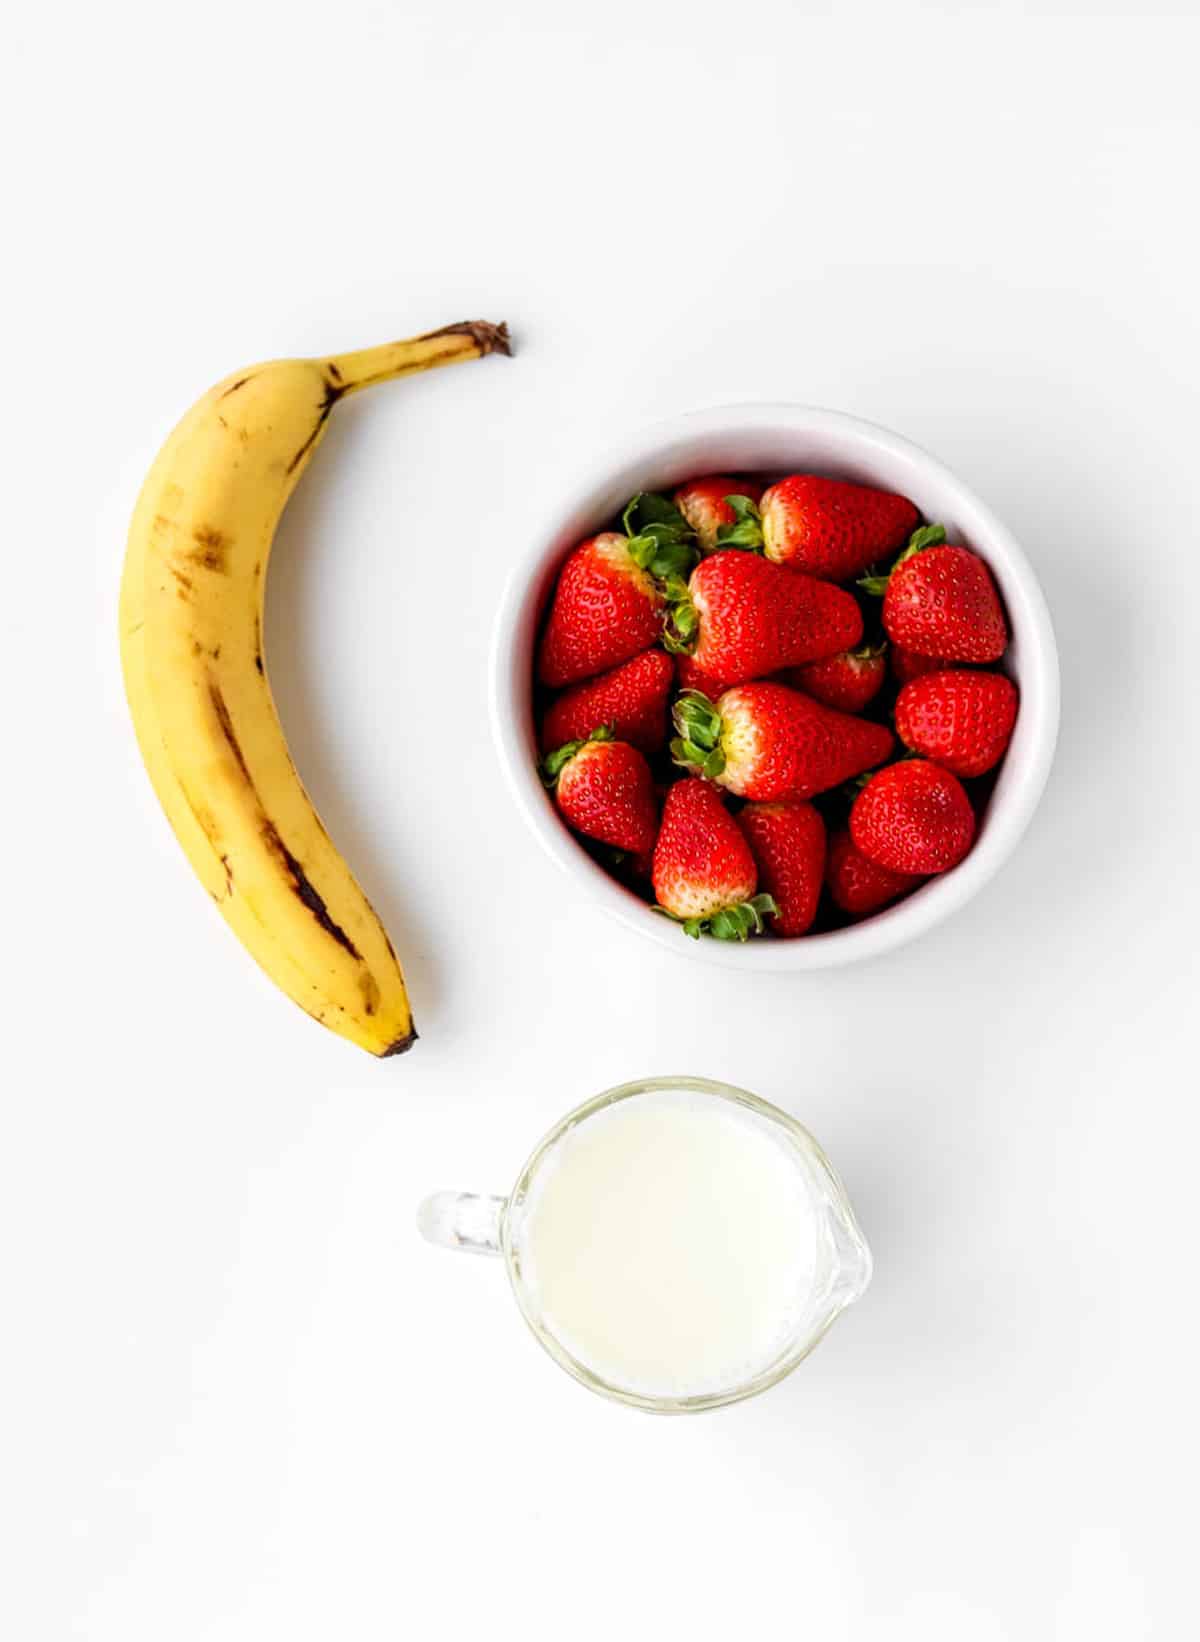 A banana, strawberries and milk for the strawberry banana smoothie recipe.